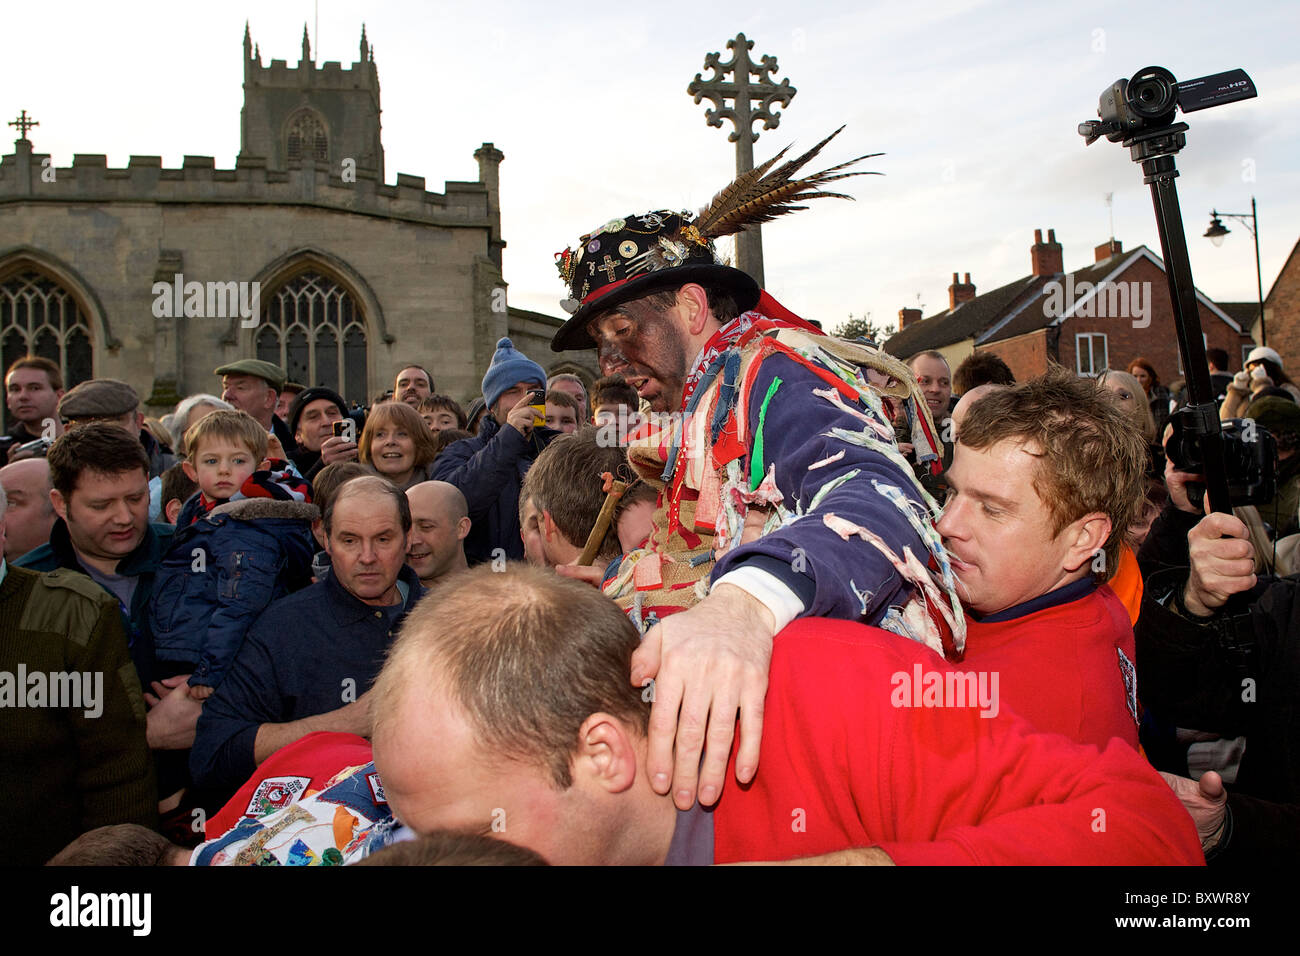 The Haxey Hood, a traditional event held in the village of Haxey, North Lincolnshire on the Twelfth Day of Christmas. The Fool, Stock Photo